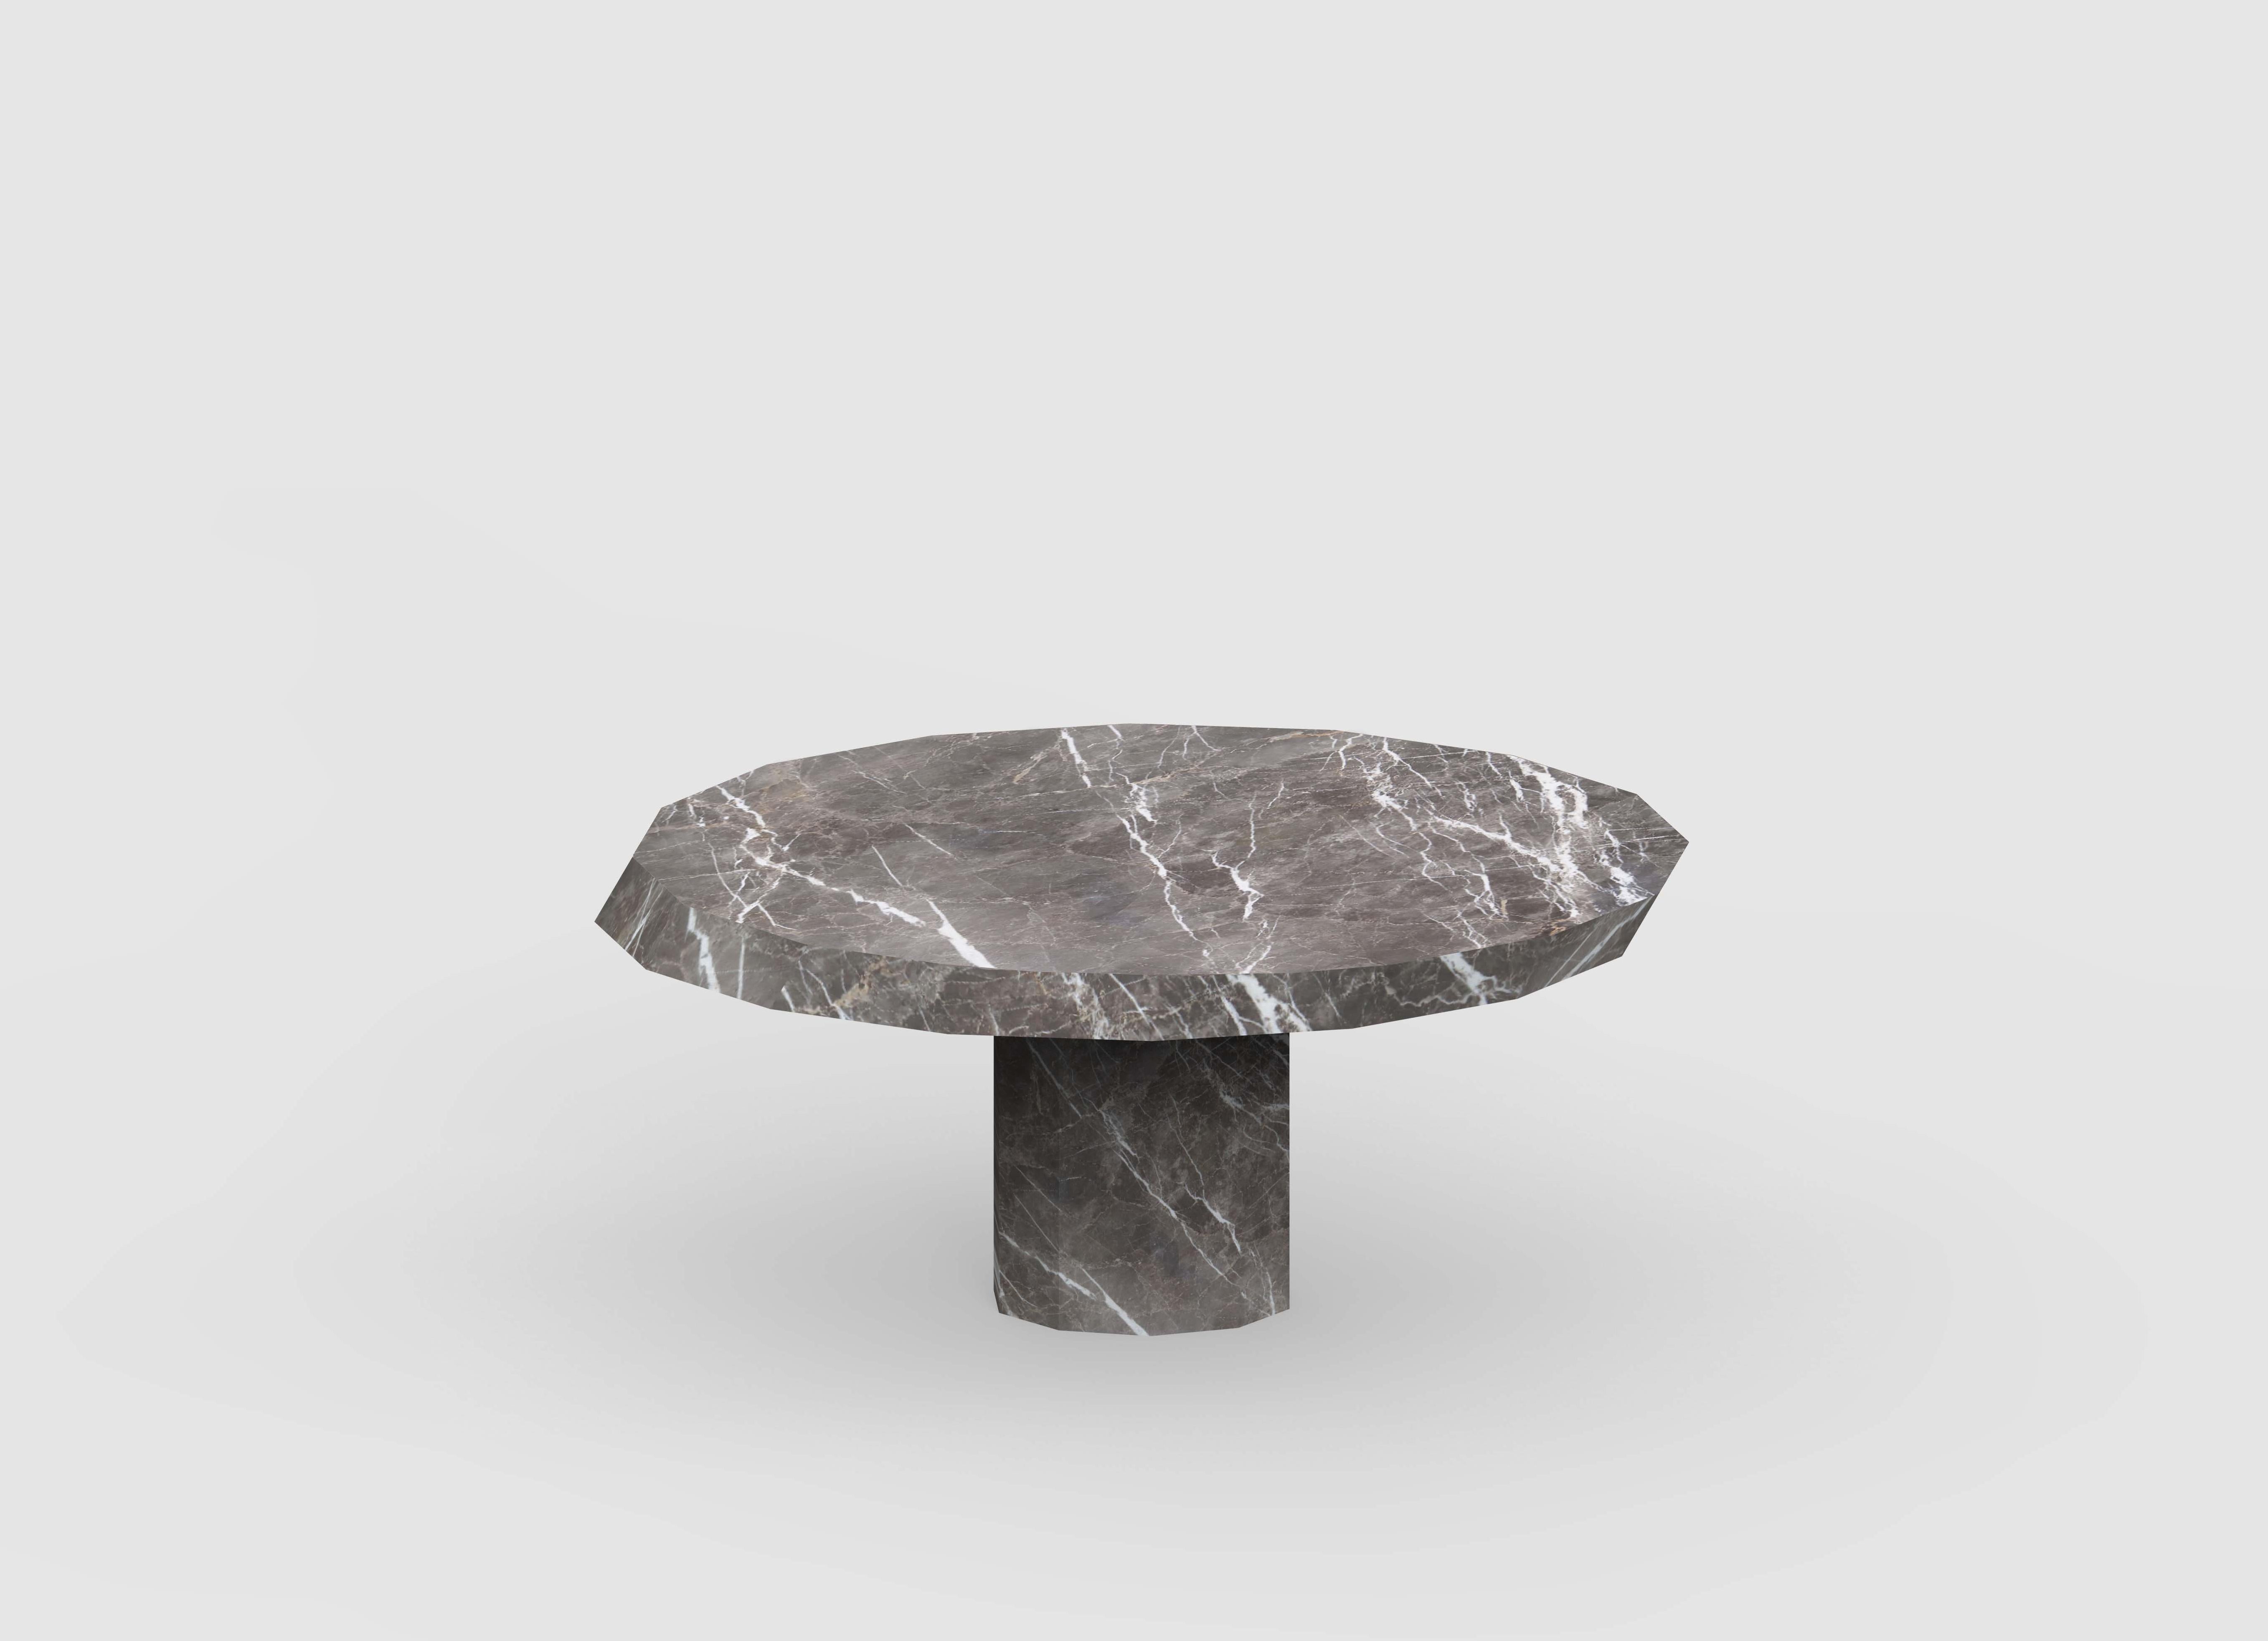 Facet side table by Stefan Scholten
Dimensions: L 82 x W 80 x H 35 cm
Materials: Grigio Collemandina

Stefan Scholten is a Dutch designer born in 1972. After graduating from the Design Academy Eindhoven he set up Copray & Scholten together with